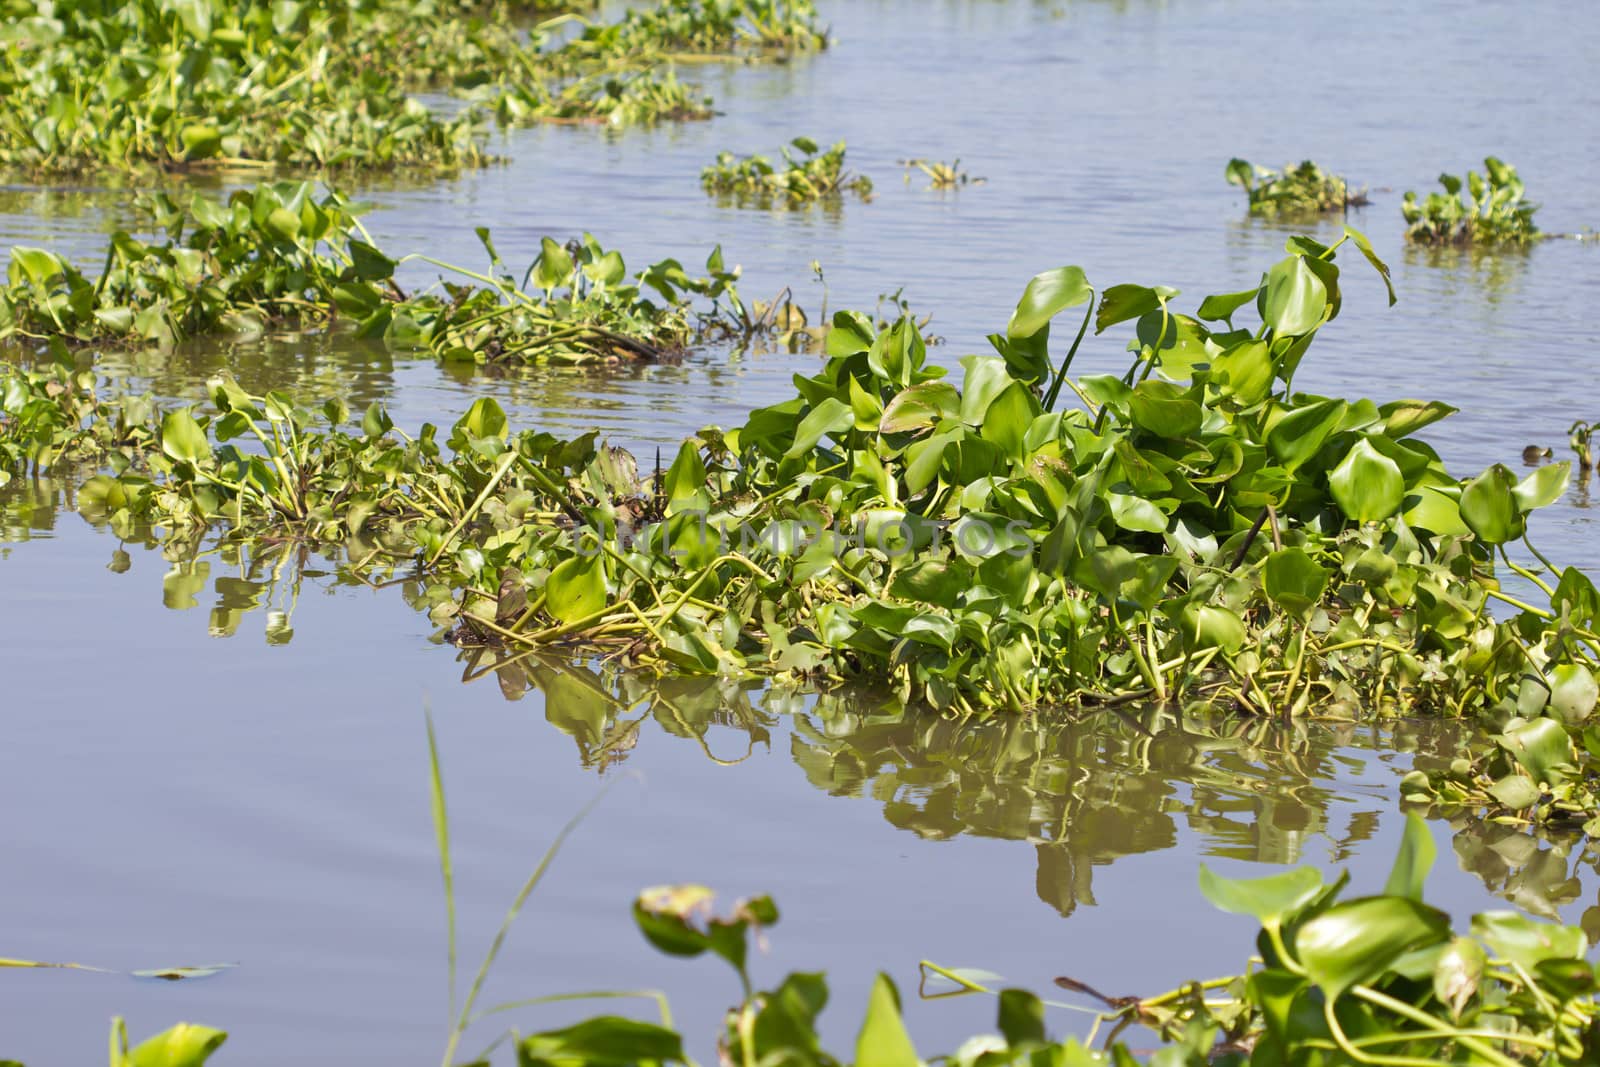 Water hyacinth floating in the river downstream.